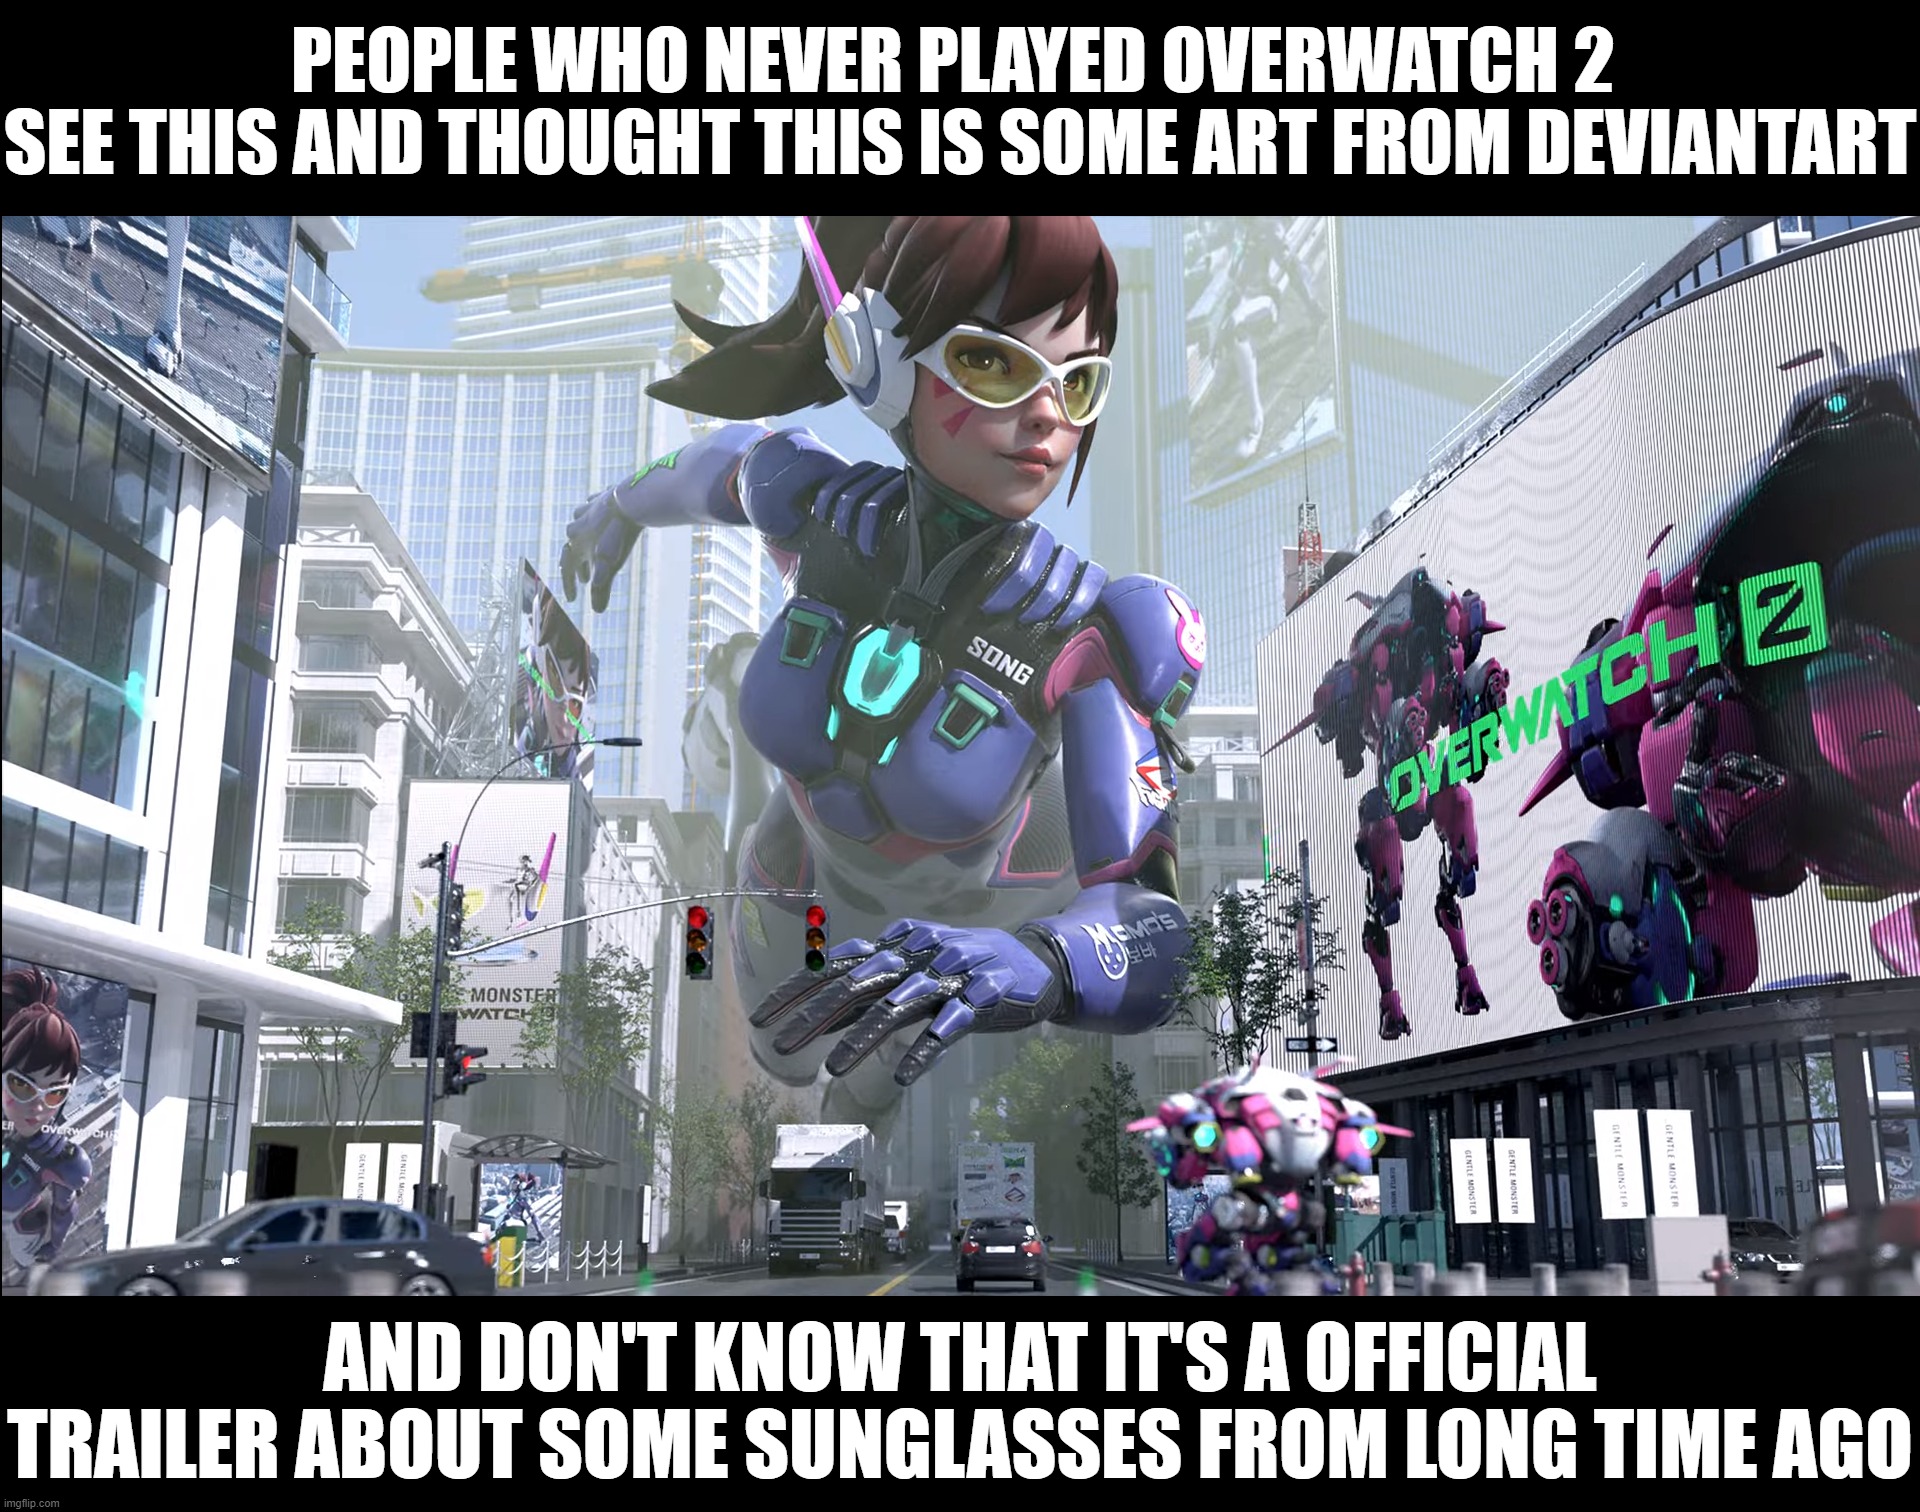 this D.va image you see | PEOPLE WHO NEVER PLAYED OVERWATCH 2 
SEE THIS AND THOUGHT THIS IS SOME ART FROM DEVIANTART; AND DON'T KNOW THAT IT'S A OFFICIAL TRAILER ABOUT SOME SUNGLASSES FROM LONG TIME AGO | image tagged in overwatch,sunglasses | made w/ Imgflip meme maker